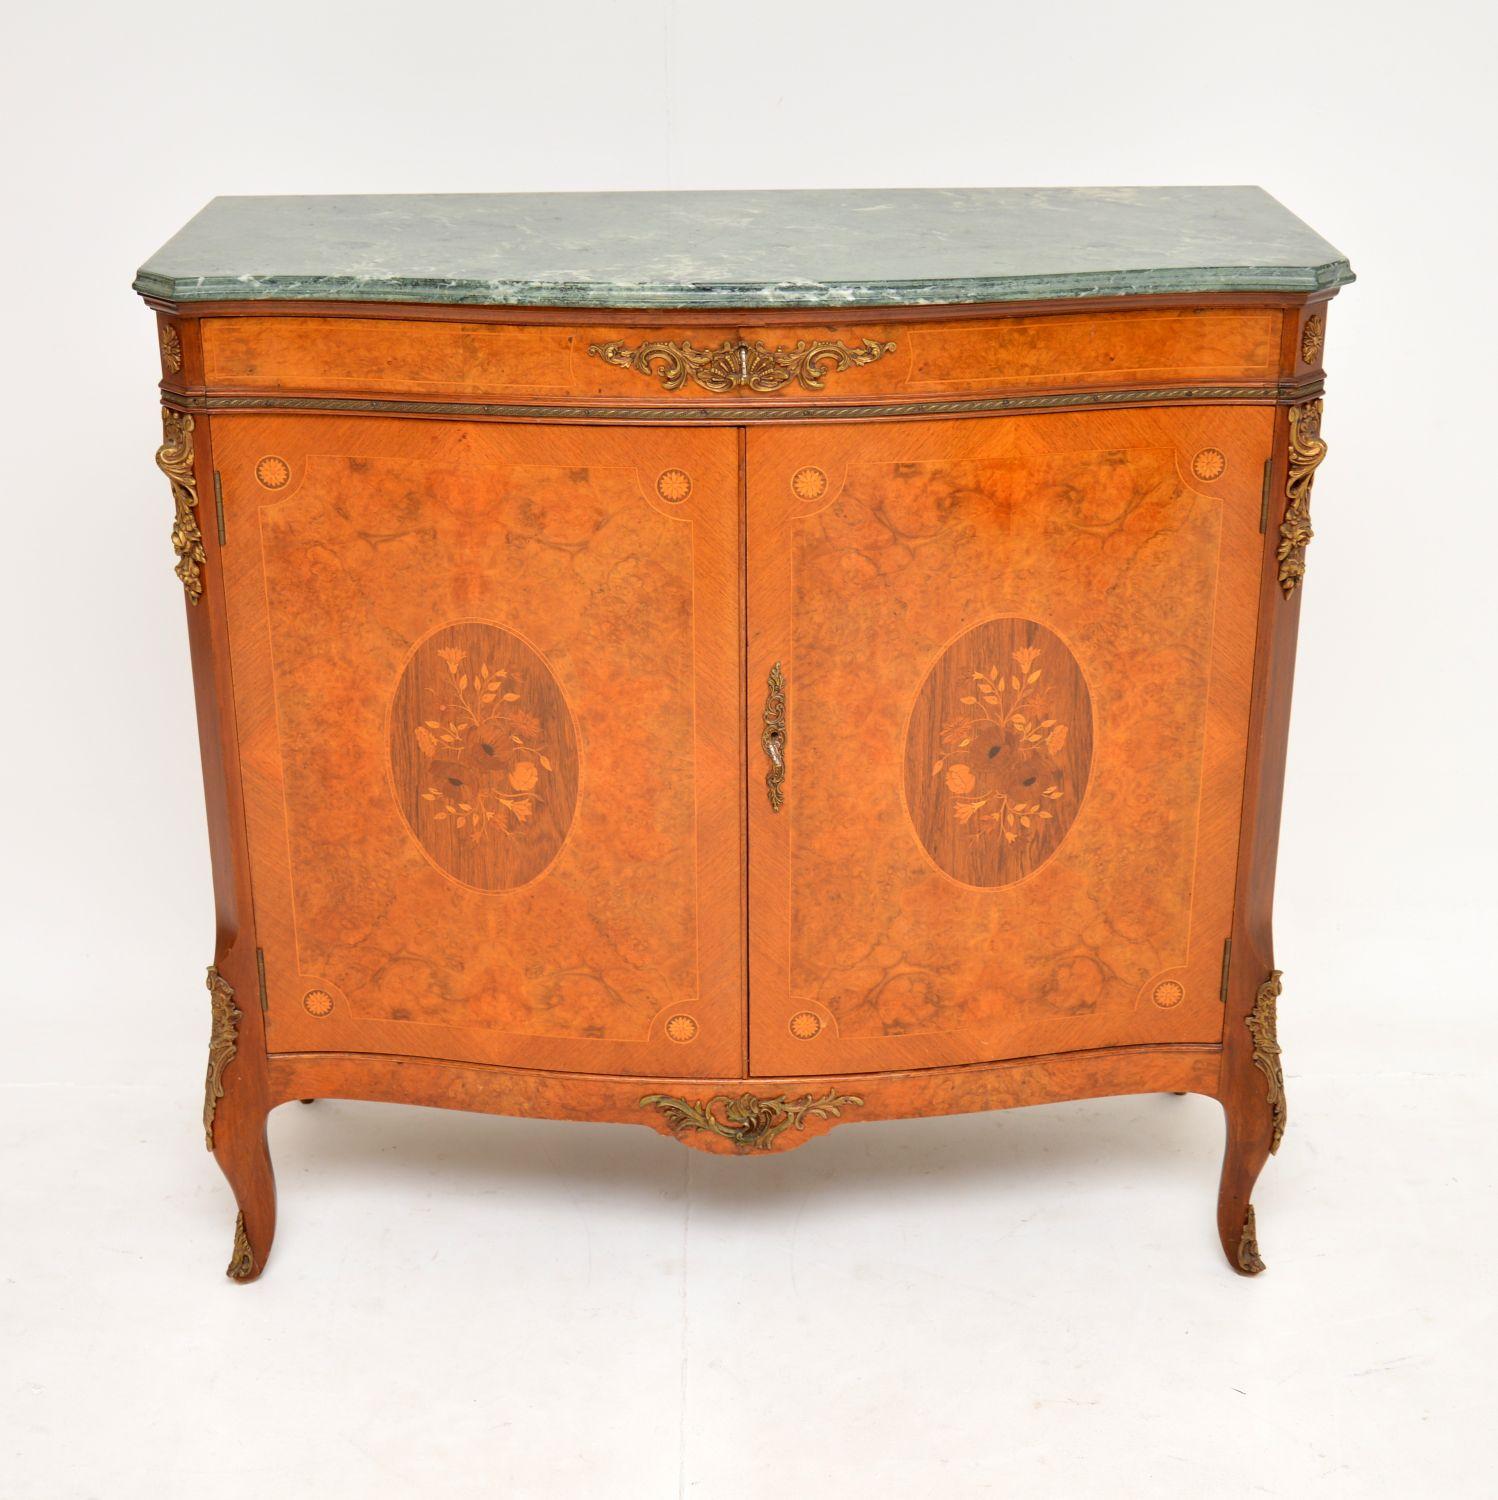 A beautiful antique French marble top cabinet in burr walnut, this dates from around the 1930’s.

It is of superb quality, with gorgeous burr walnut grain patterns. The doors have inlaid wood panels with floral patterns, there are also fine quality